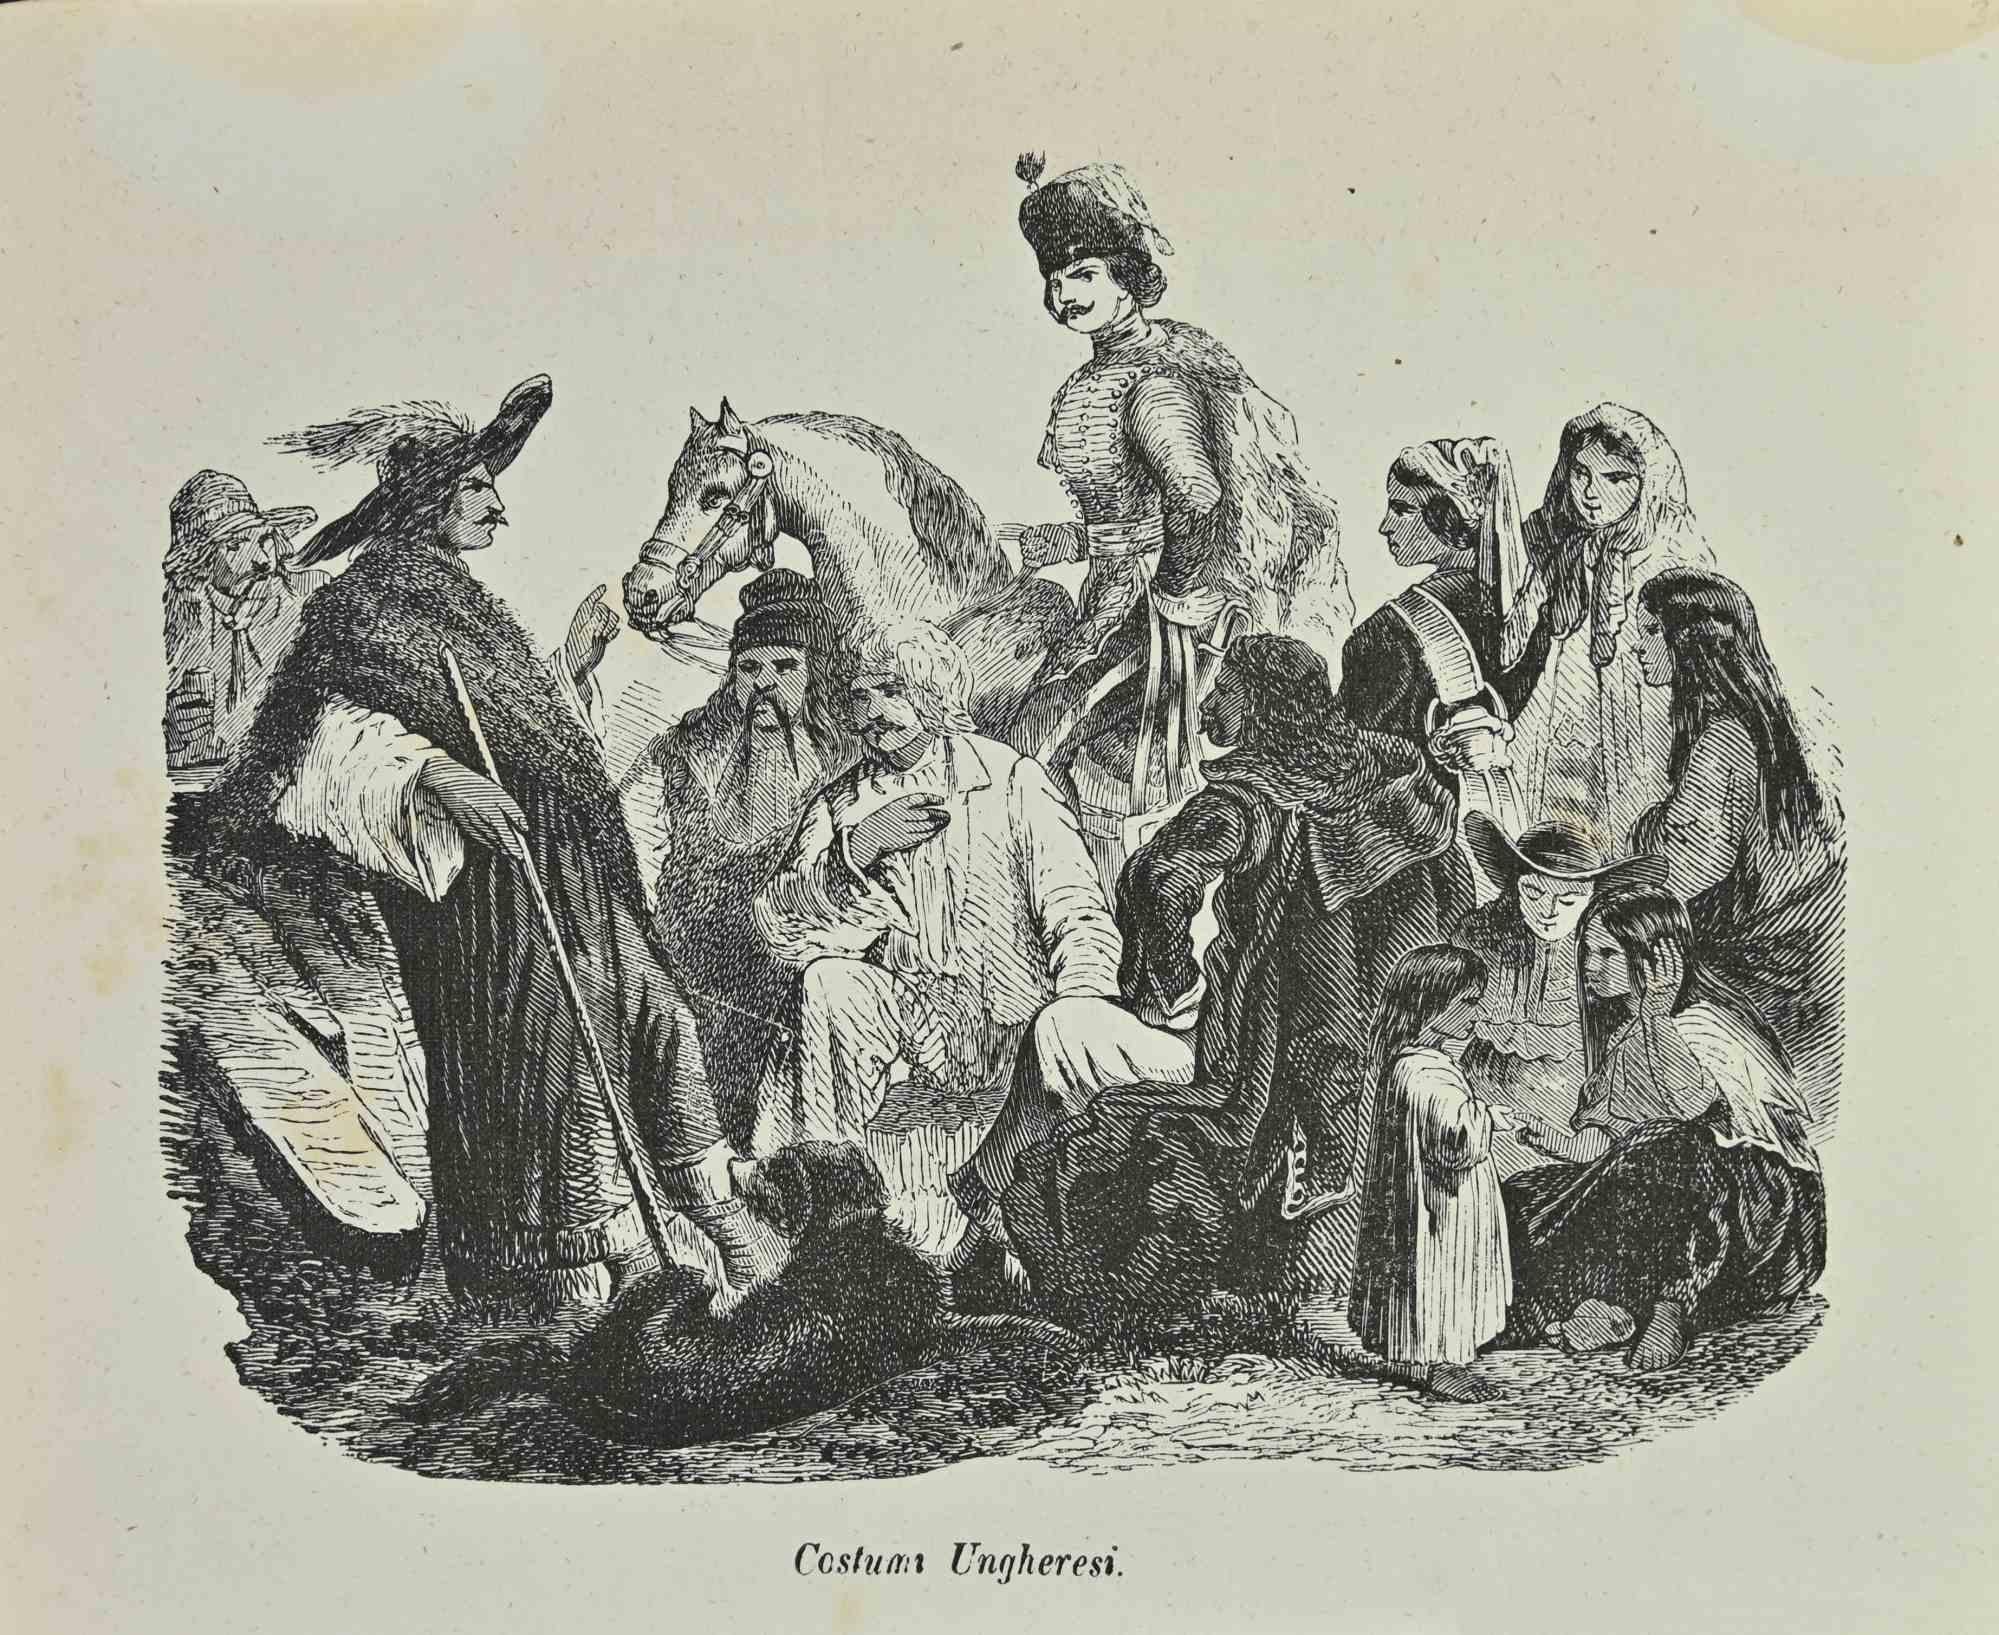 Hungarian Customs is a lithograph made by Auguste Wahlen in 1844.

Drawing in black and white.

Good condition.

At the center of the artwork is the original title "Costumi Ungheresi".

The work is part of Suite Moeurs, usages et costumes de tous